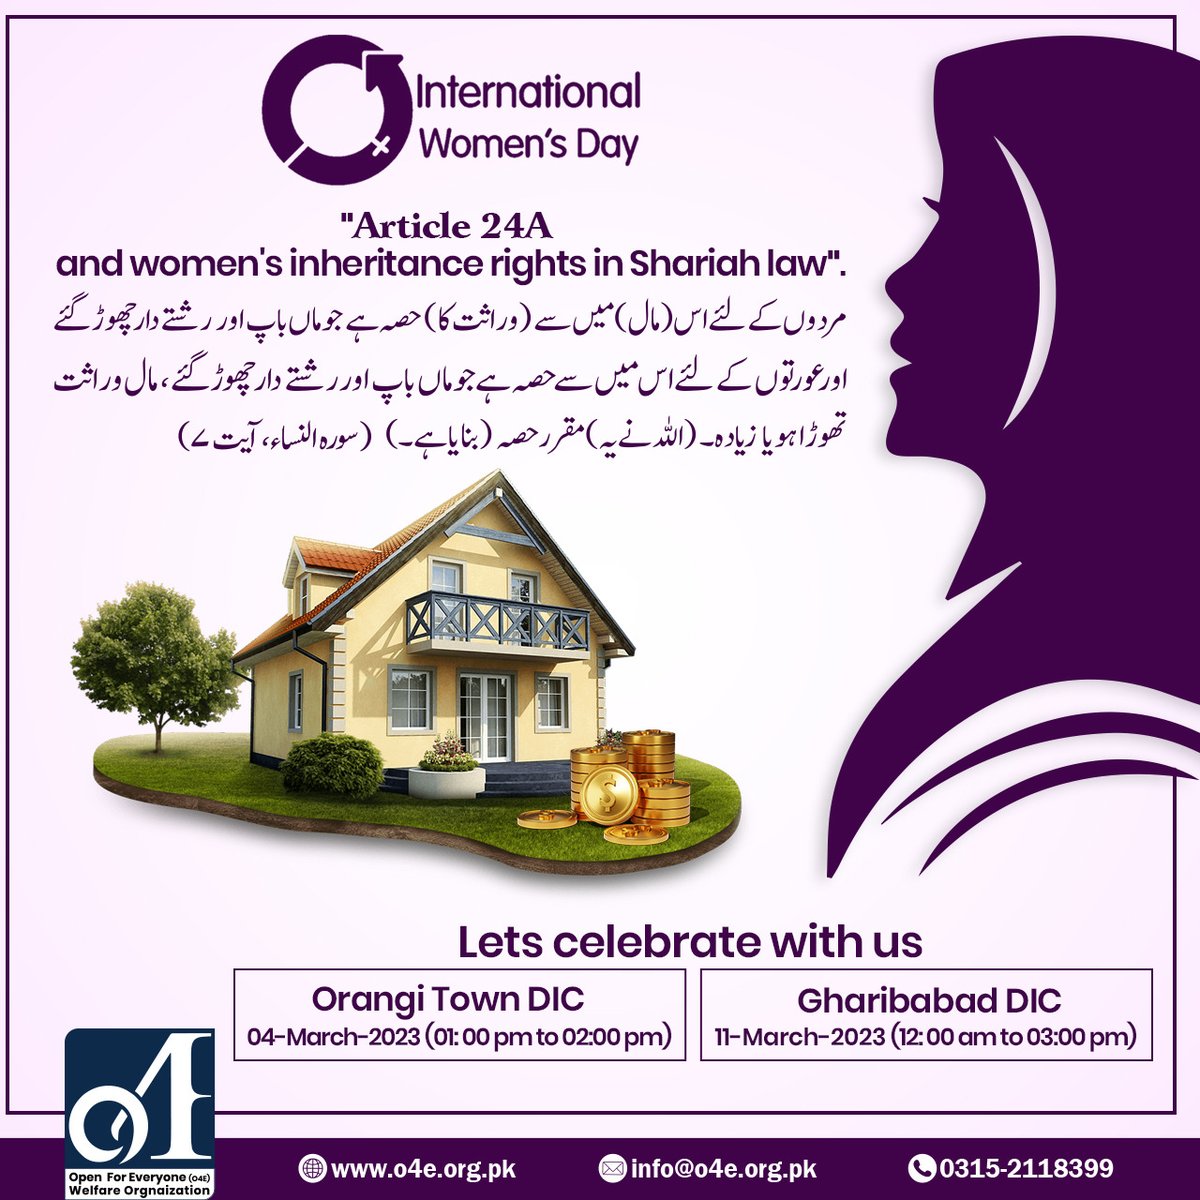 Happy International Women's Day! Let's talk about Article 24A and women's inheritance rights in Shariah law. 

#IWD23  #GenderEquality #womenempowerment #STS #gharibabad #OrangiTown #streettoschool #streetchildren #streetschoolbyhassanghoghari